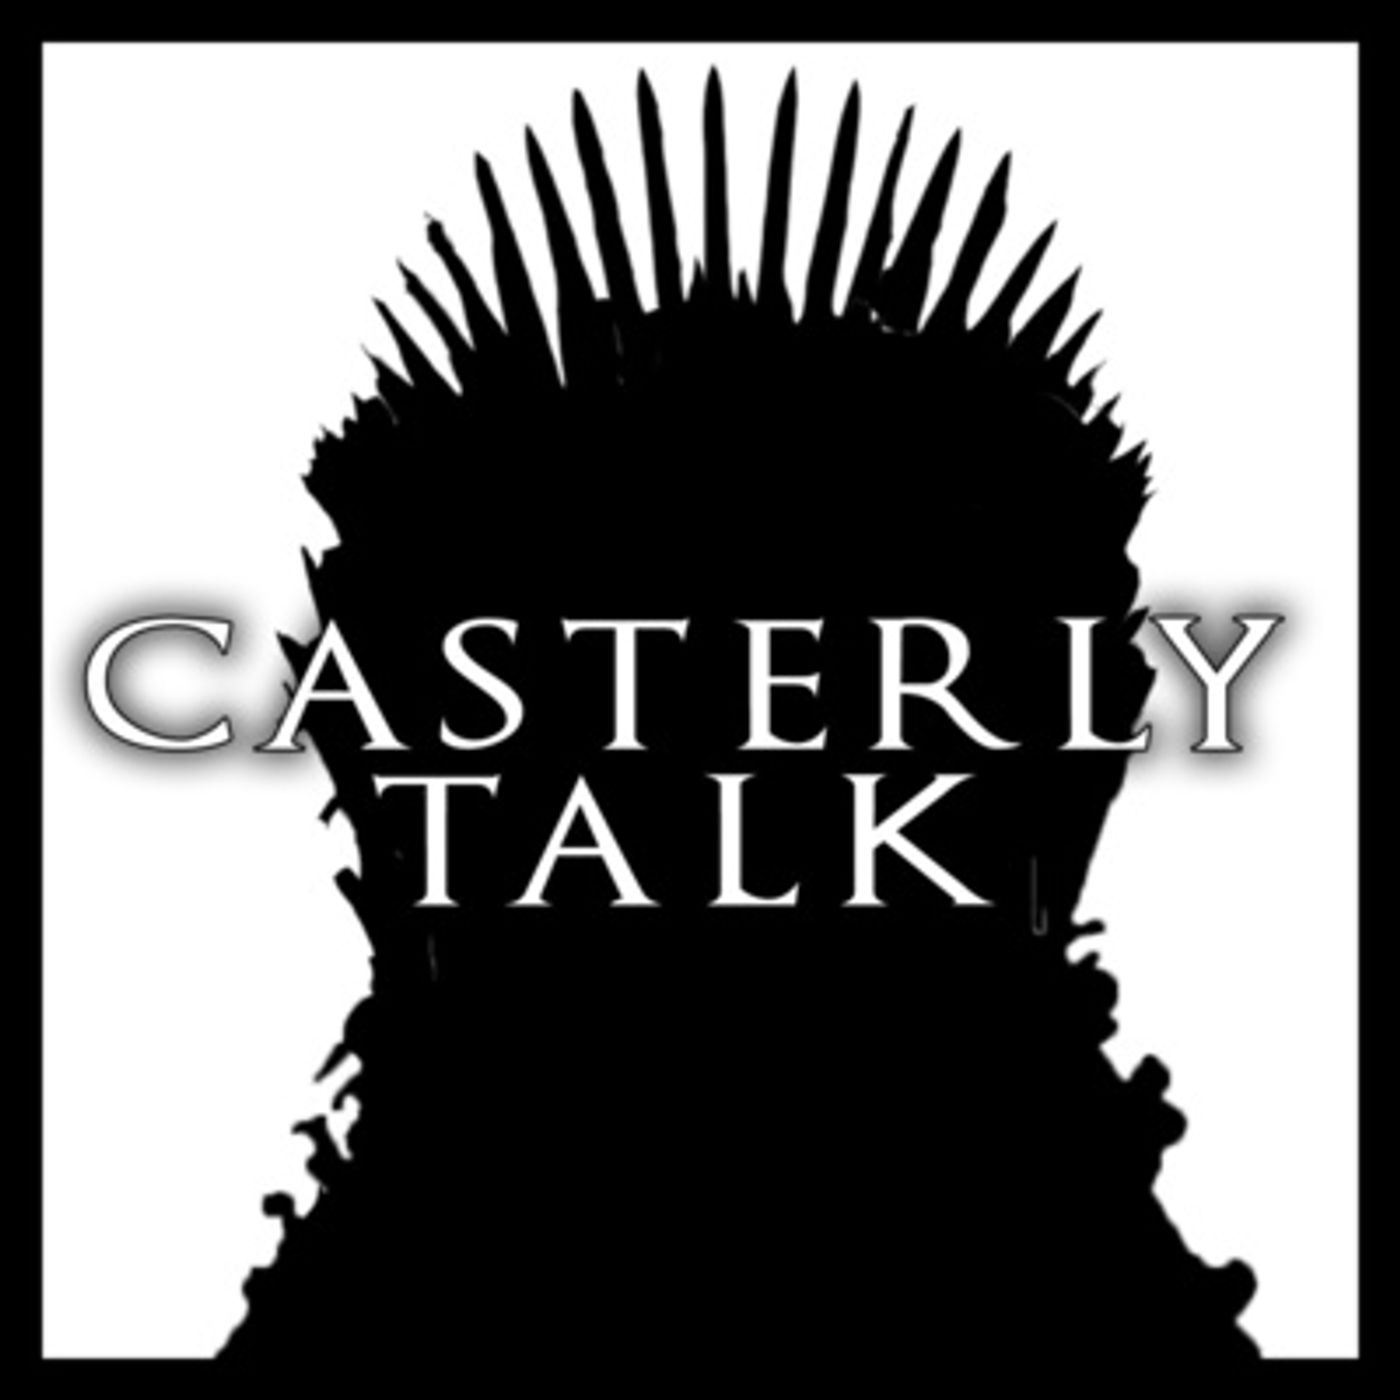 KISSED BY FIRE - GAME OF THRONES REWATCH - Casterly Talk - EP 104